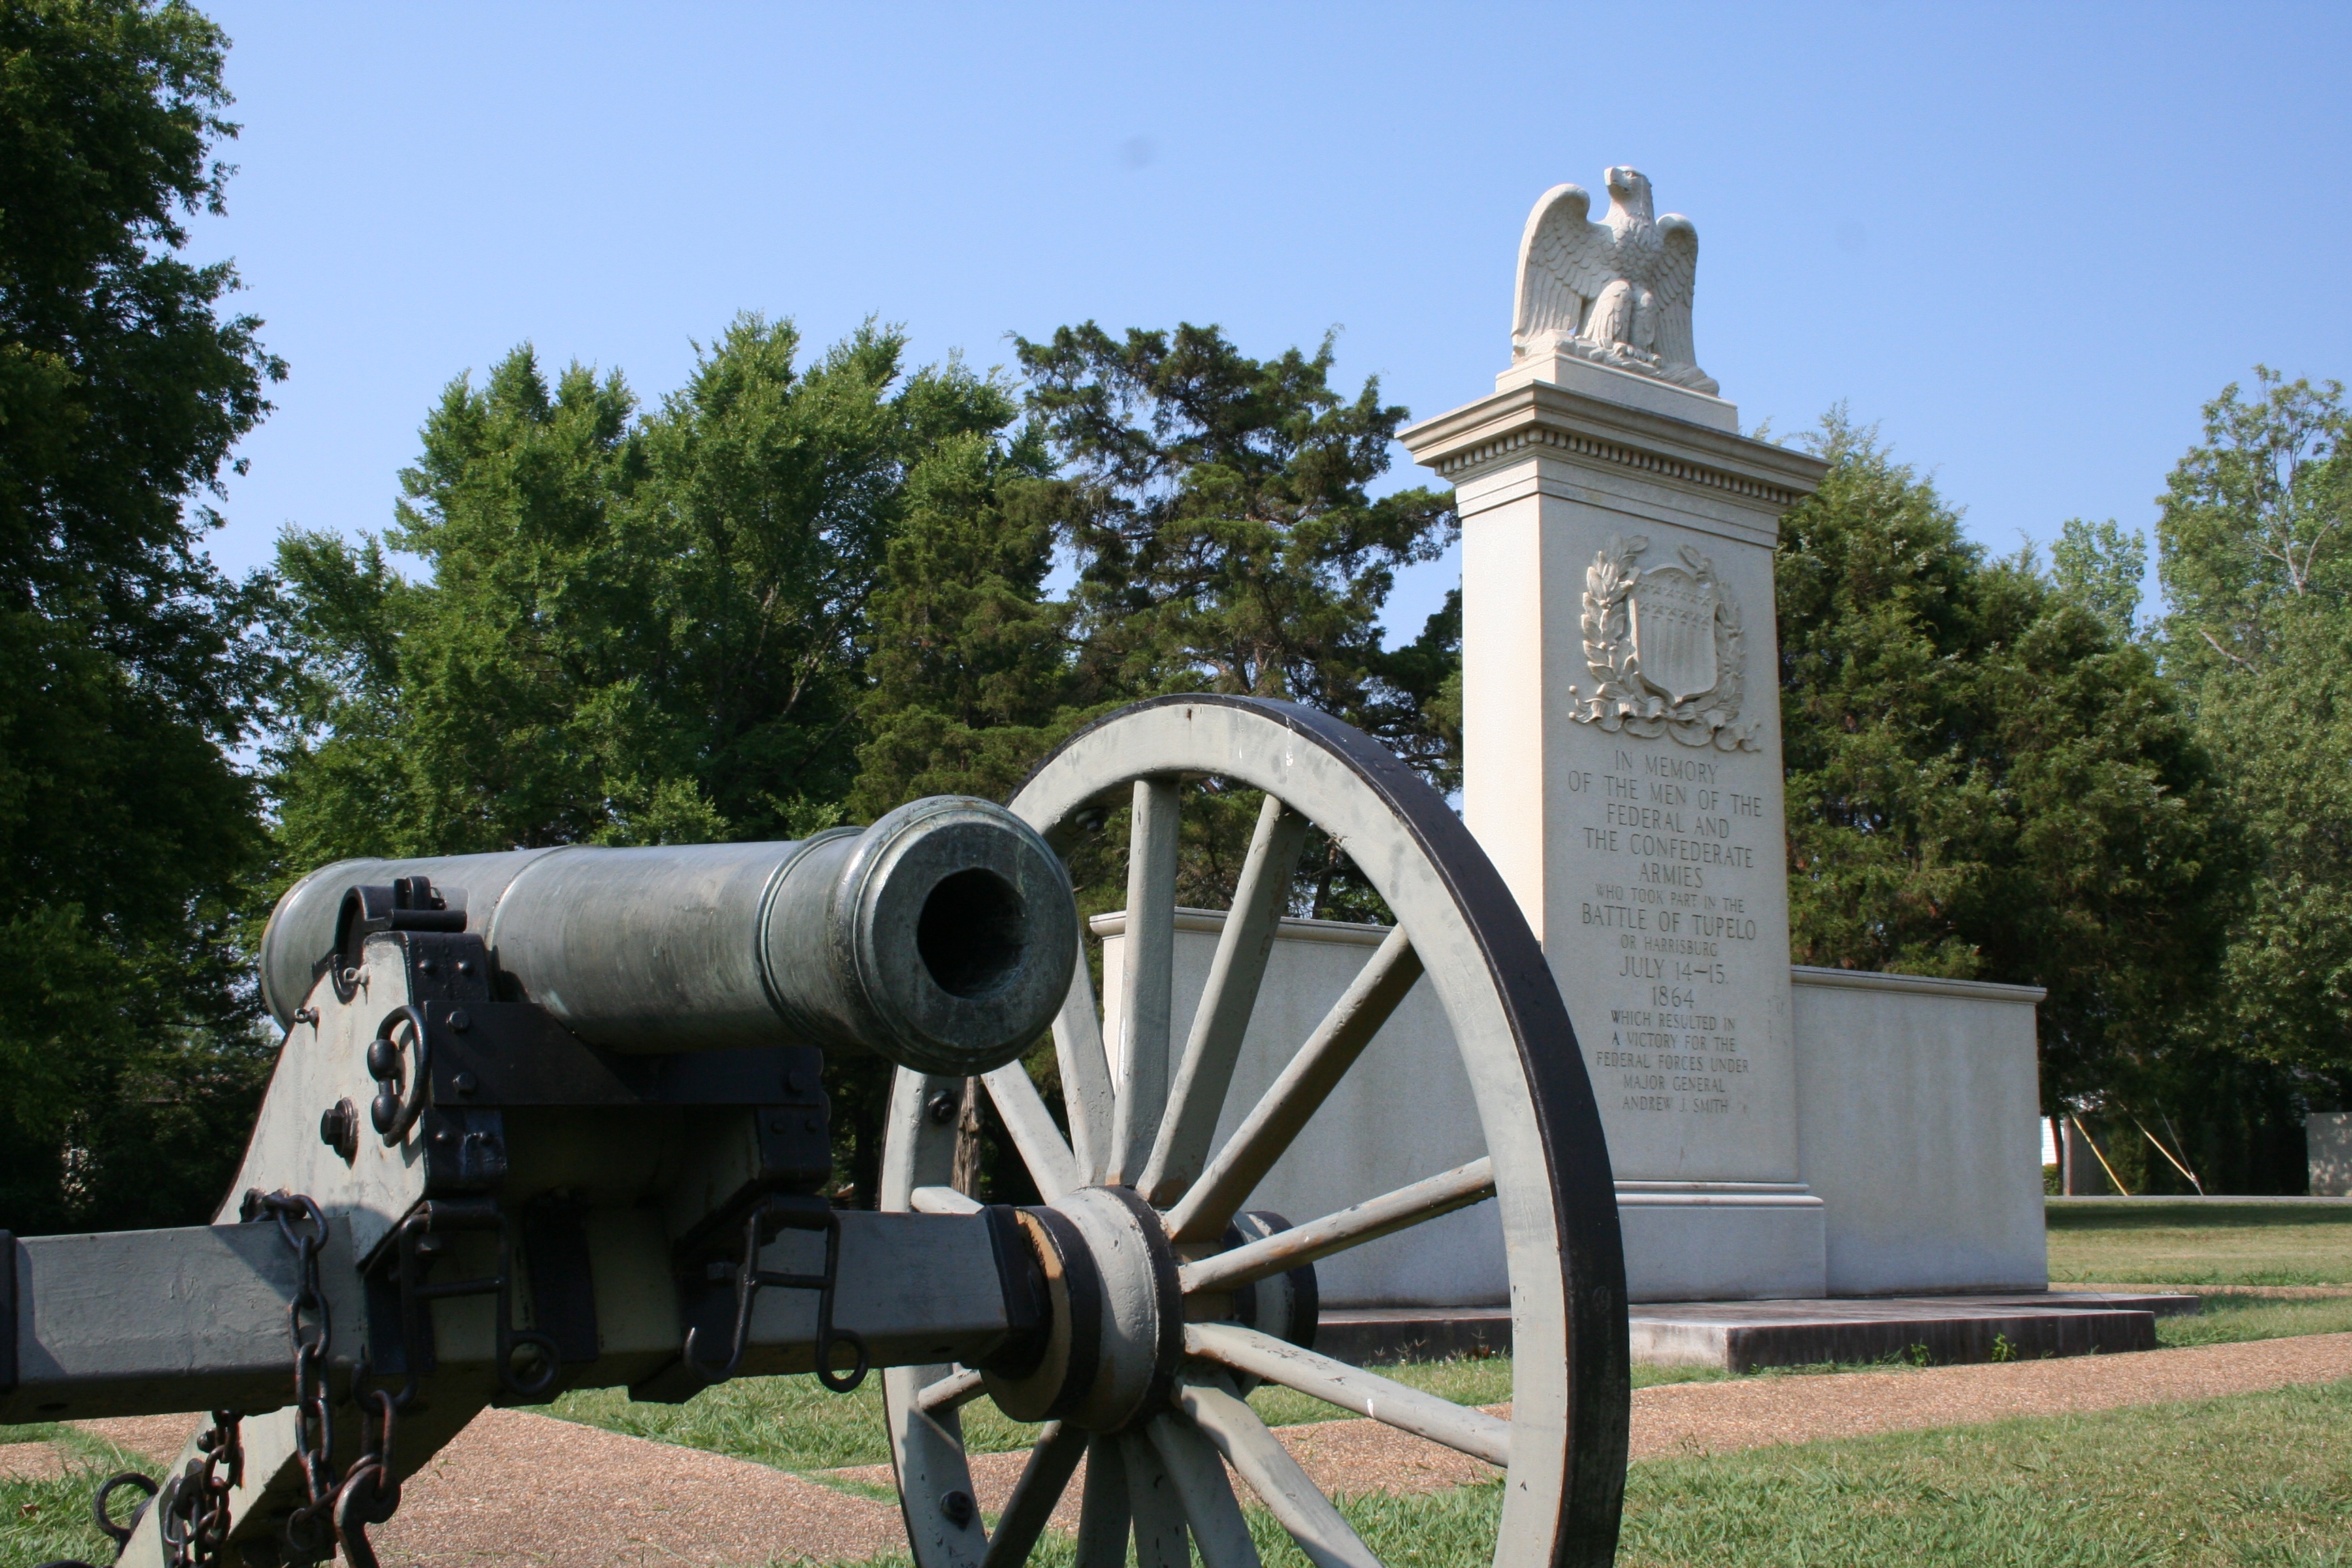 The monument with a cannon